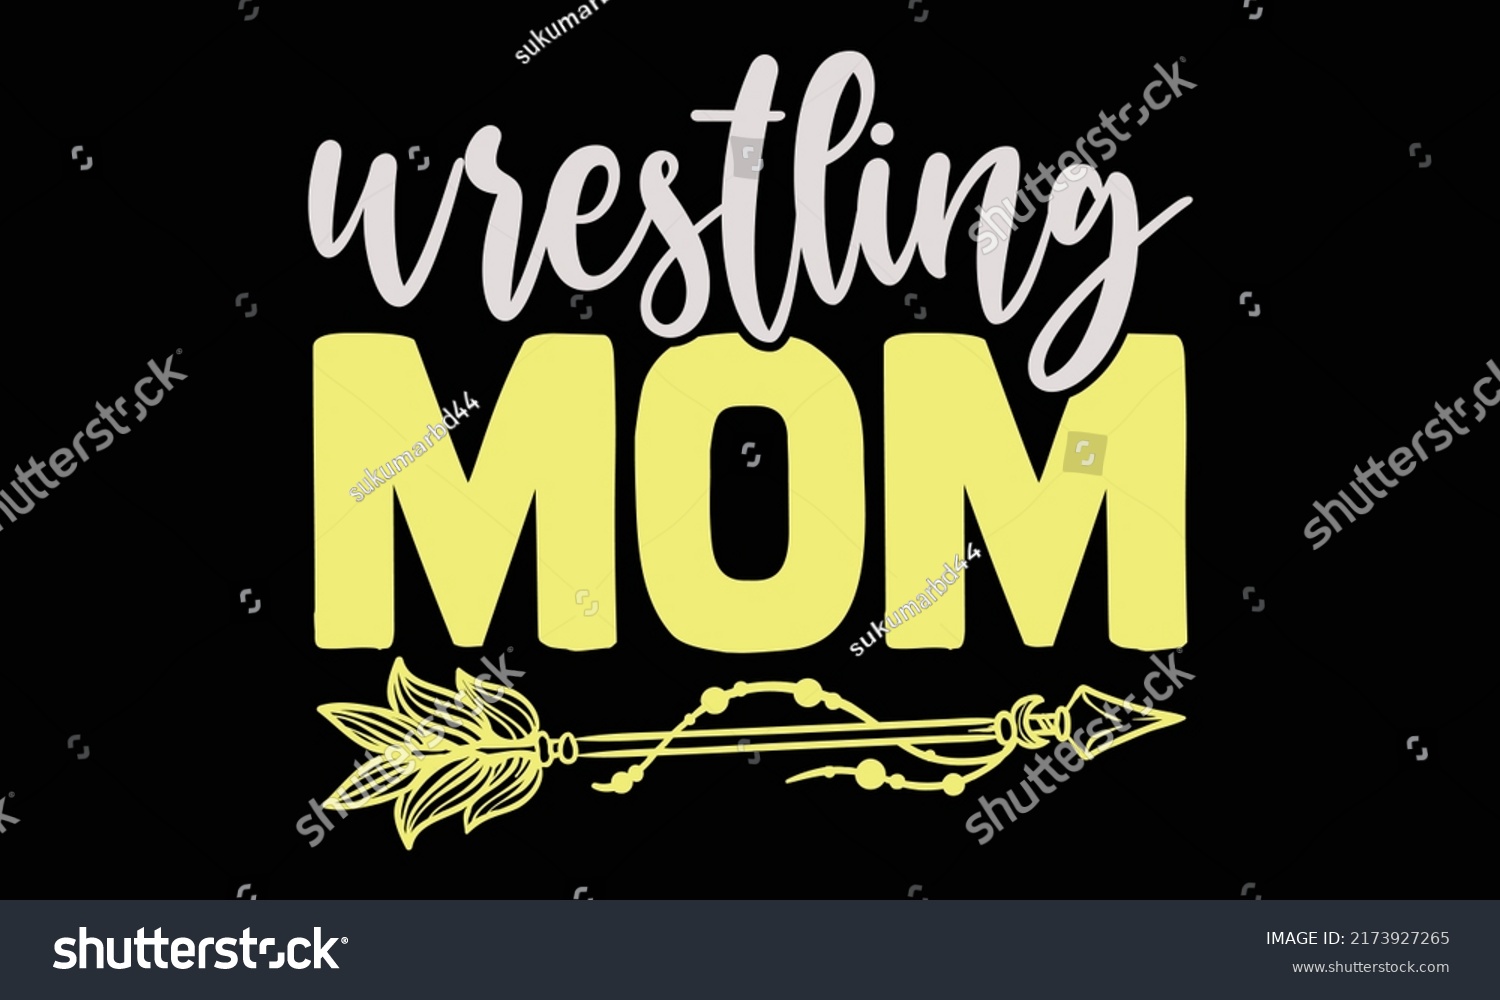 SVG of Wrestling mom - wrestling t shirts design, Hand drawn lettering phrase, Calligraphy t shirt design, Isolated on white background, svg Files for Cutting and Silhouette, EPS 10 svg